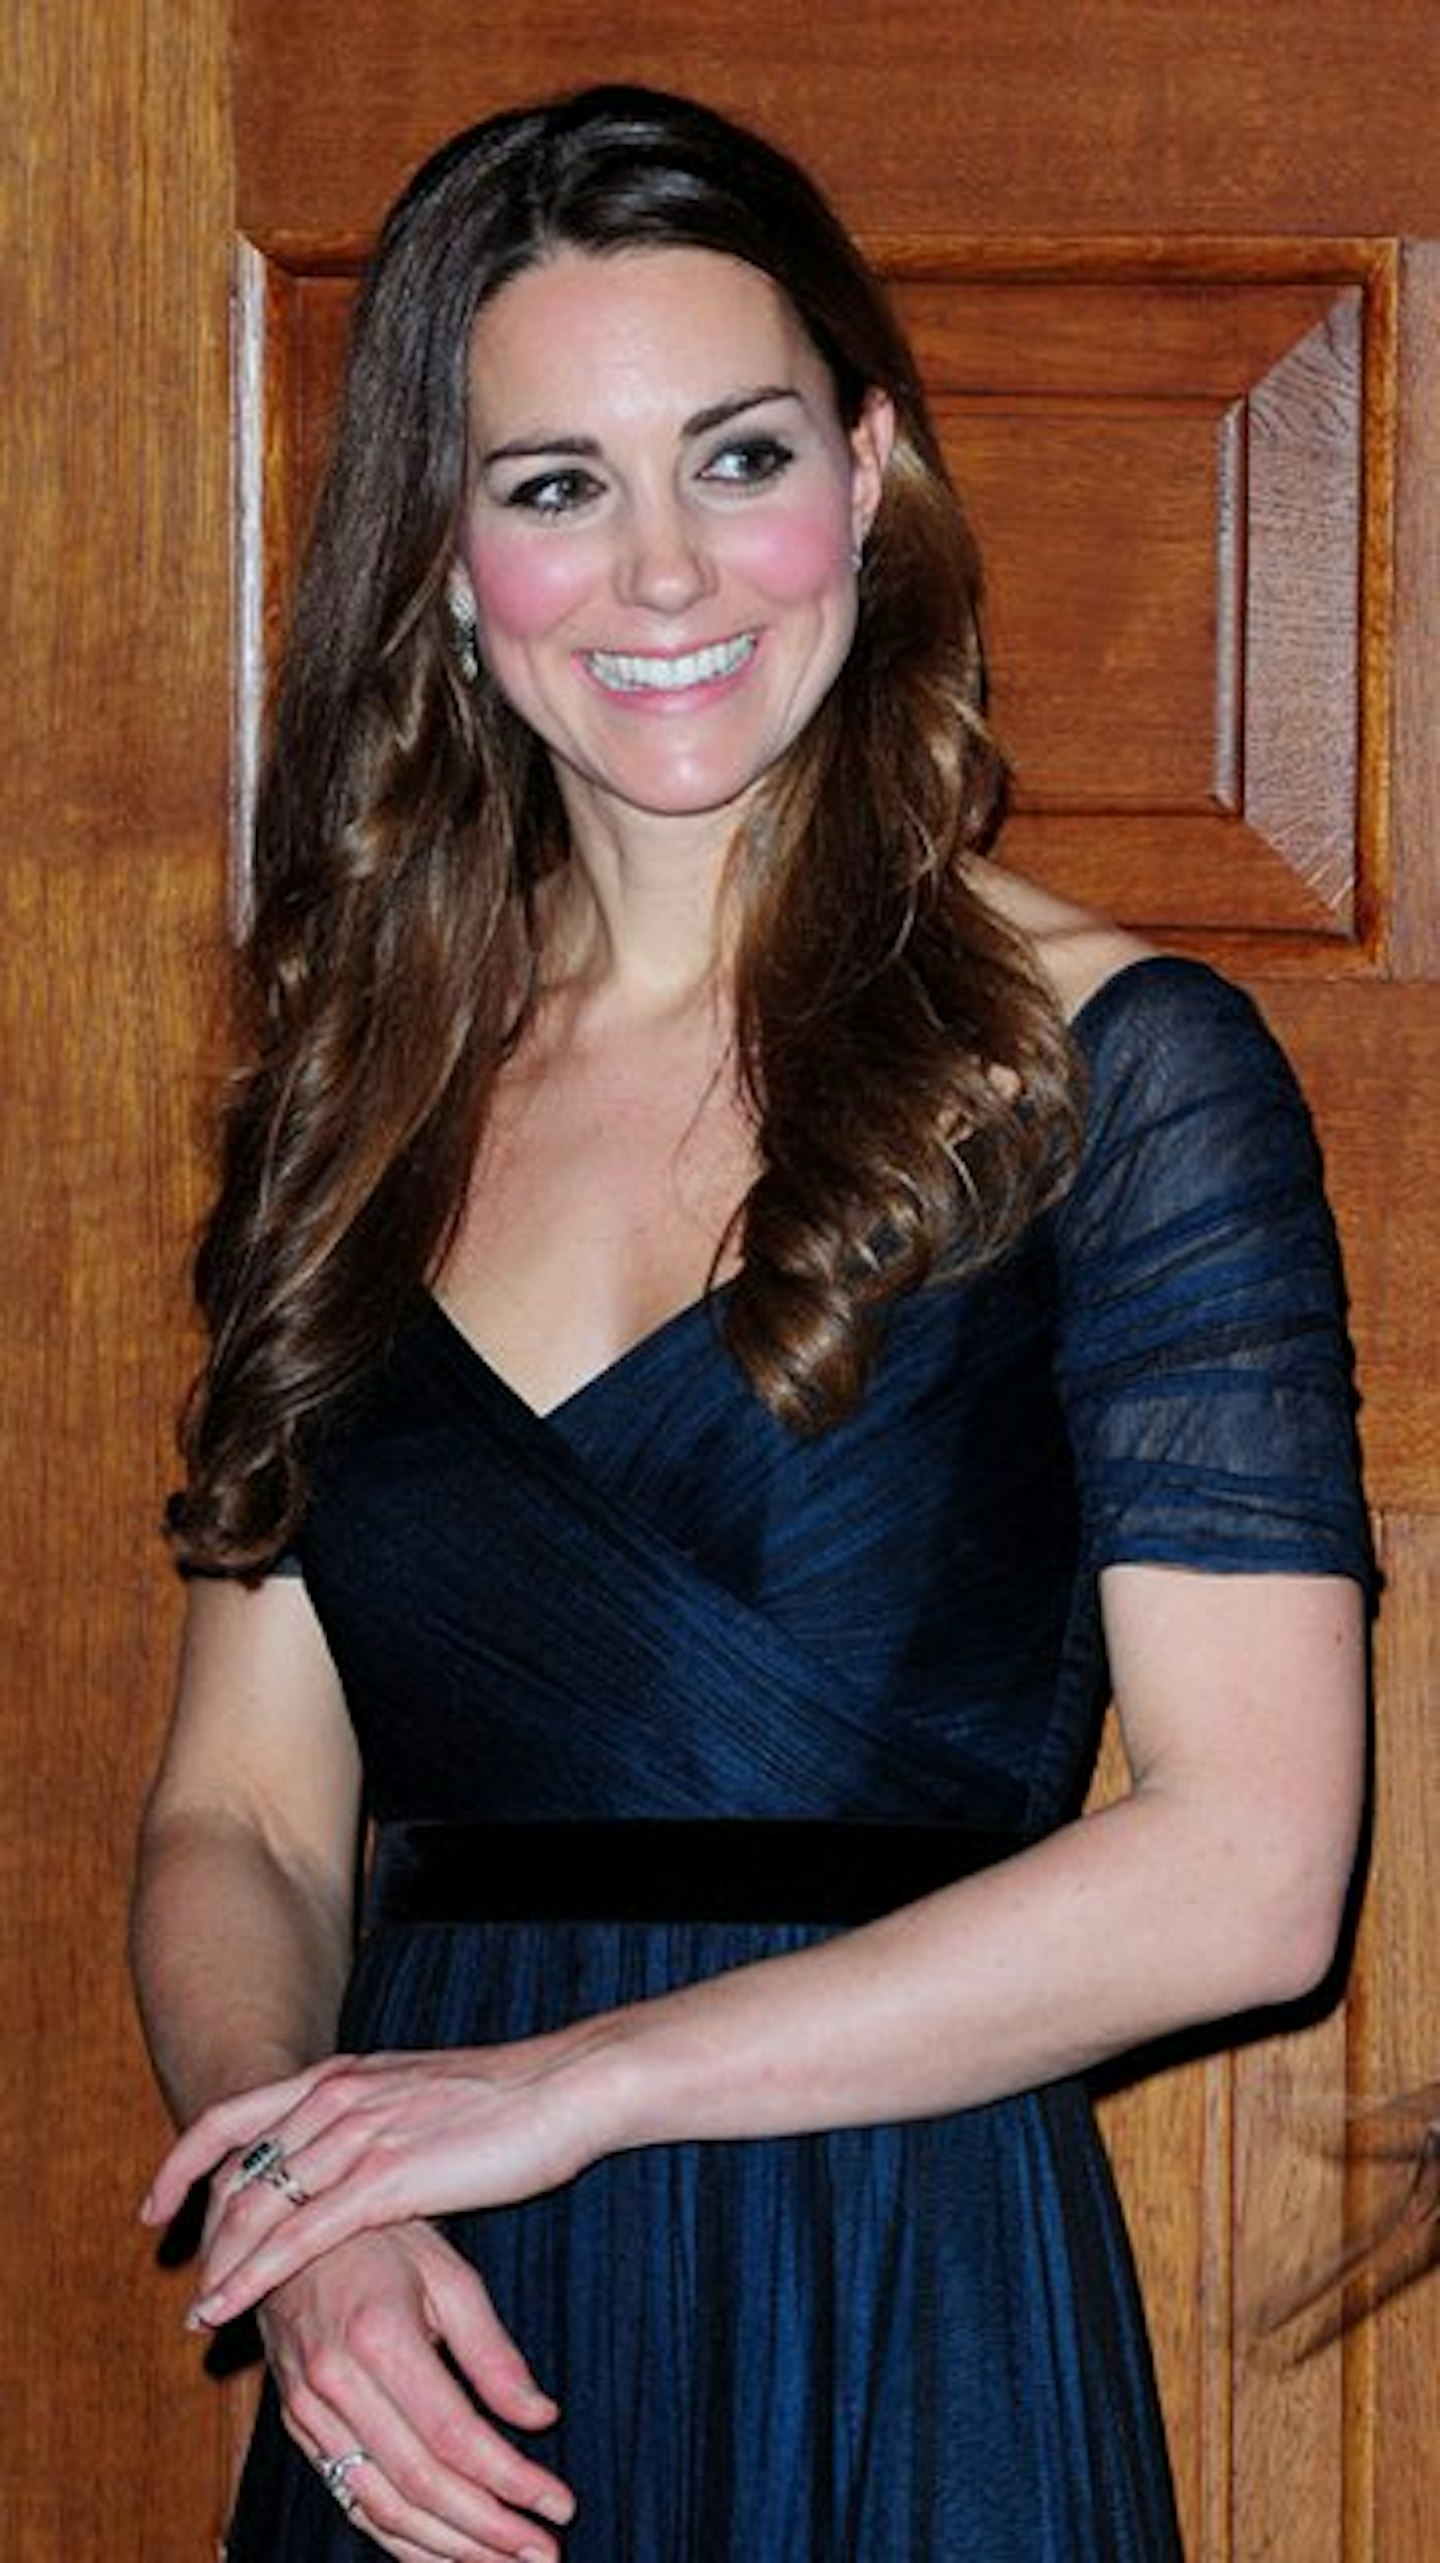 Kate looked relaxed and happy as she spoke to the attendees